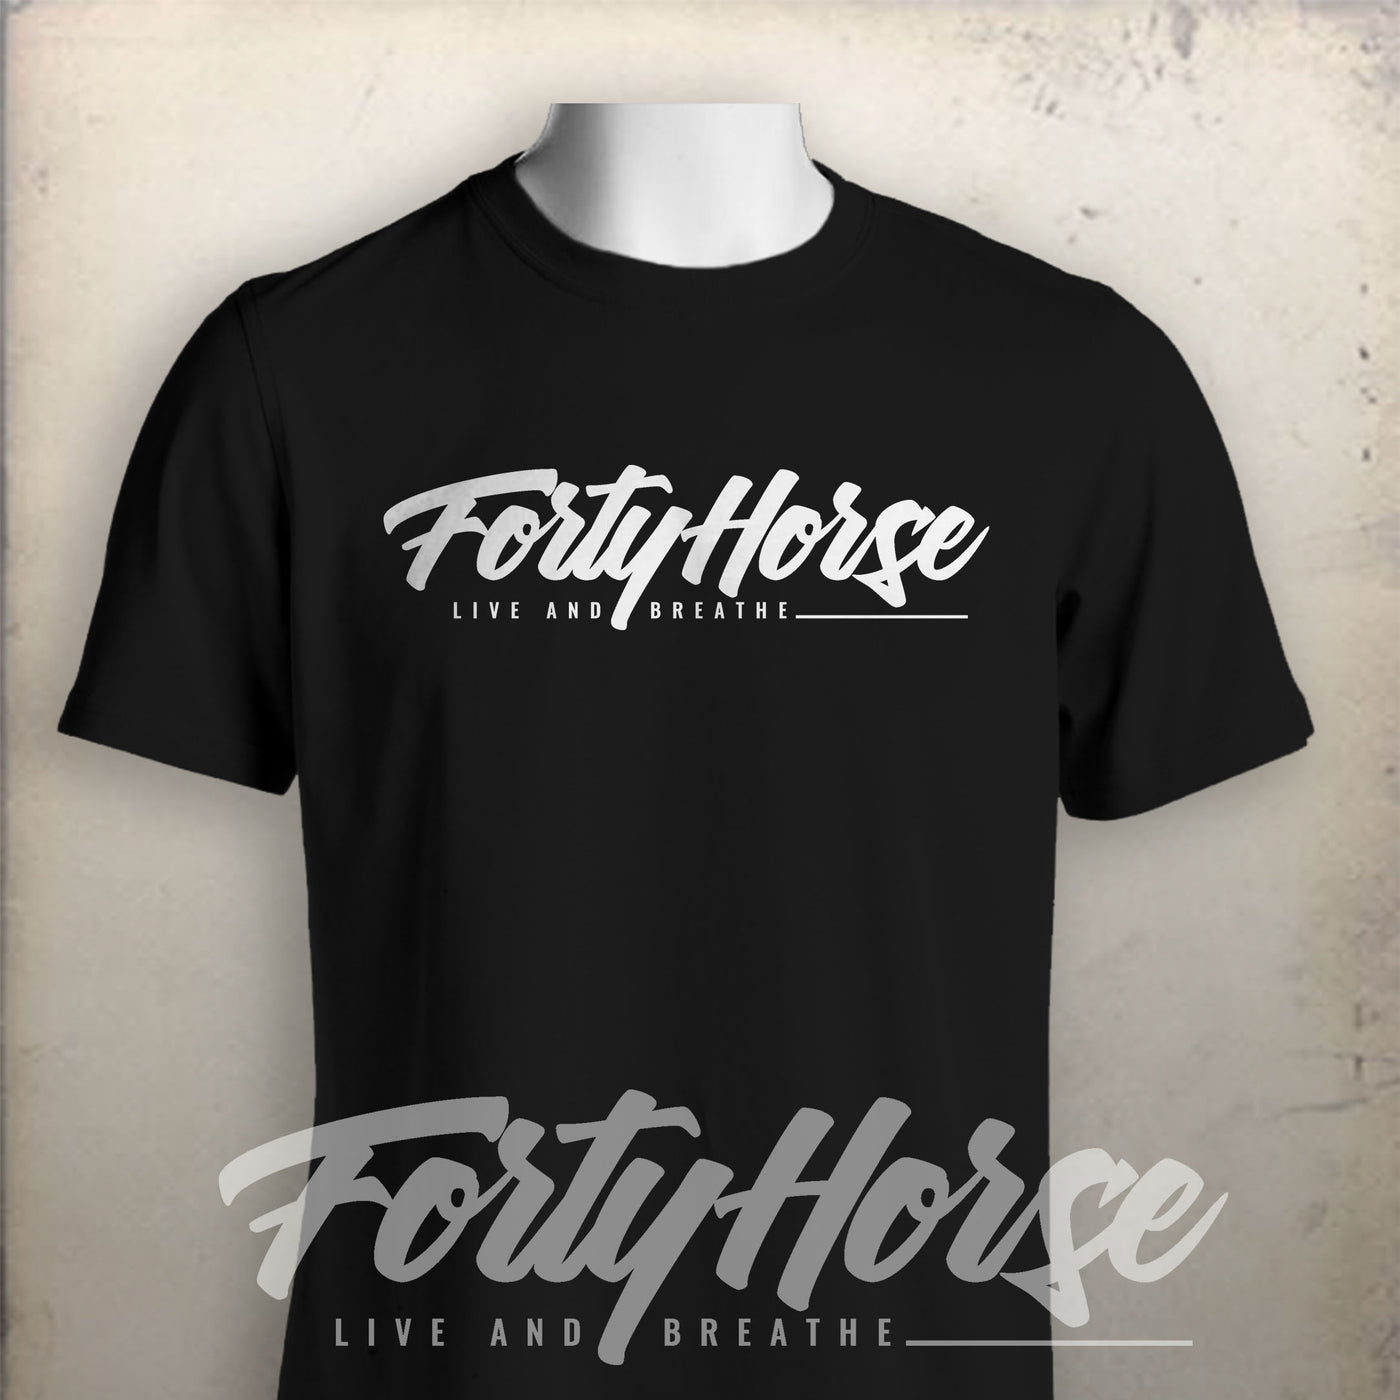 Forty Horse Logo